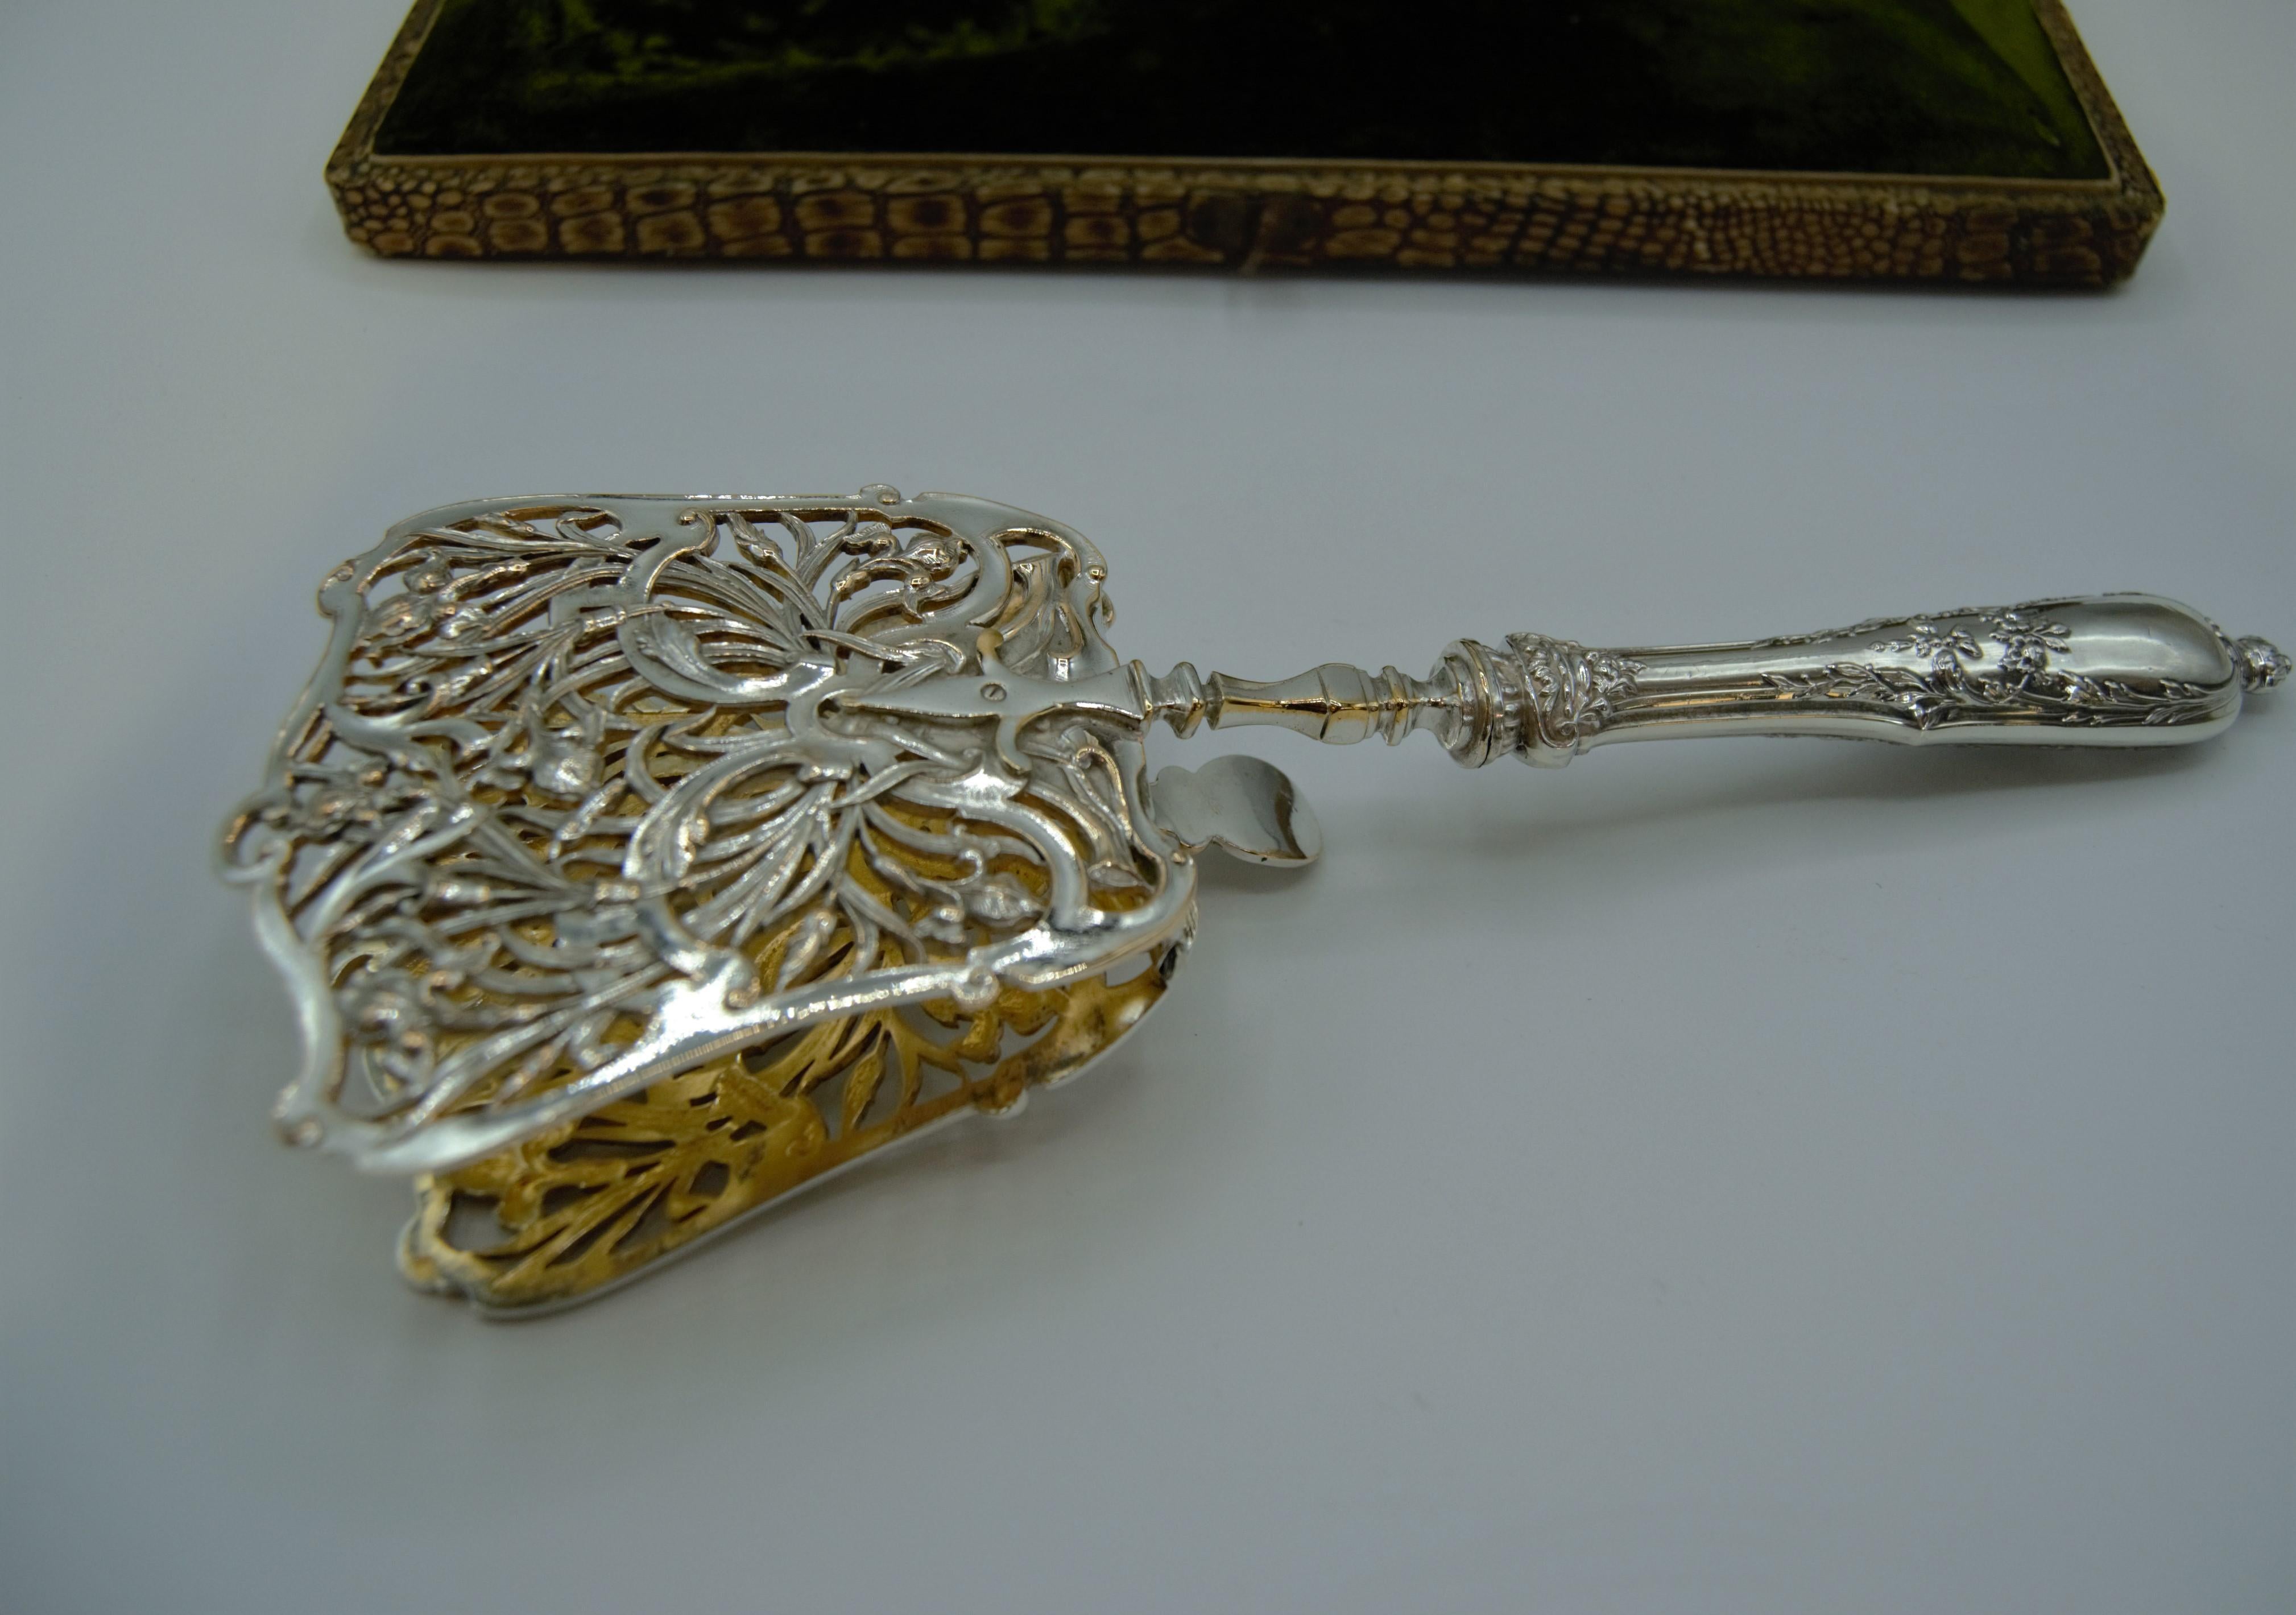 A. Chapus
Asparagus shovel/tong. Neck in solid silver neck brace and top in silver metal.

Still in its case.

Mark: 